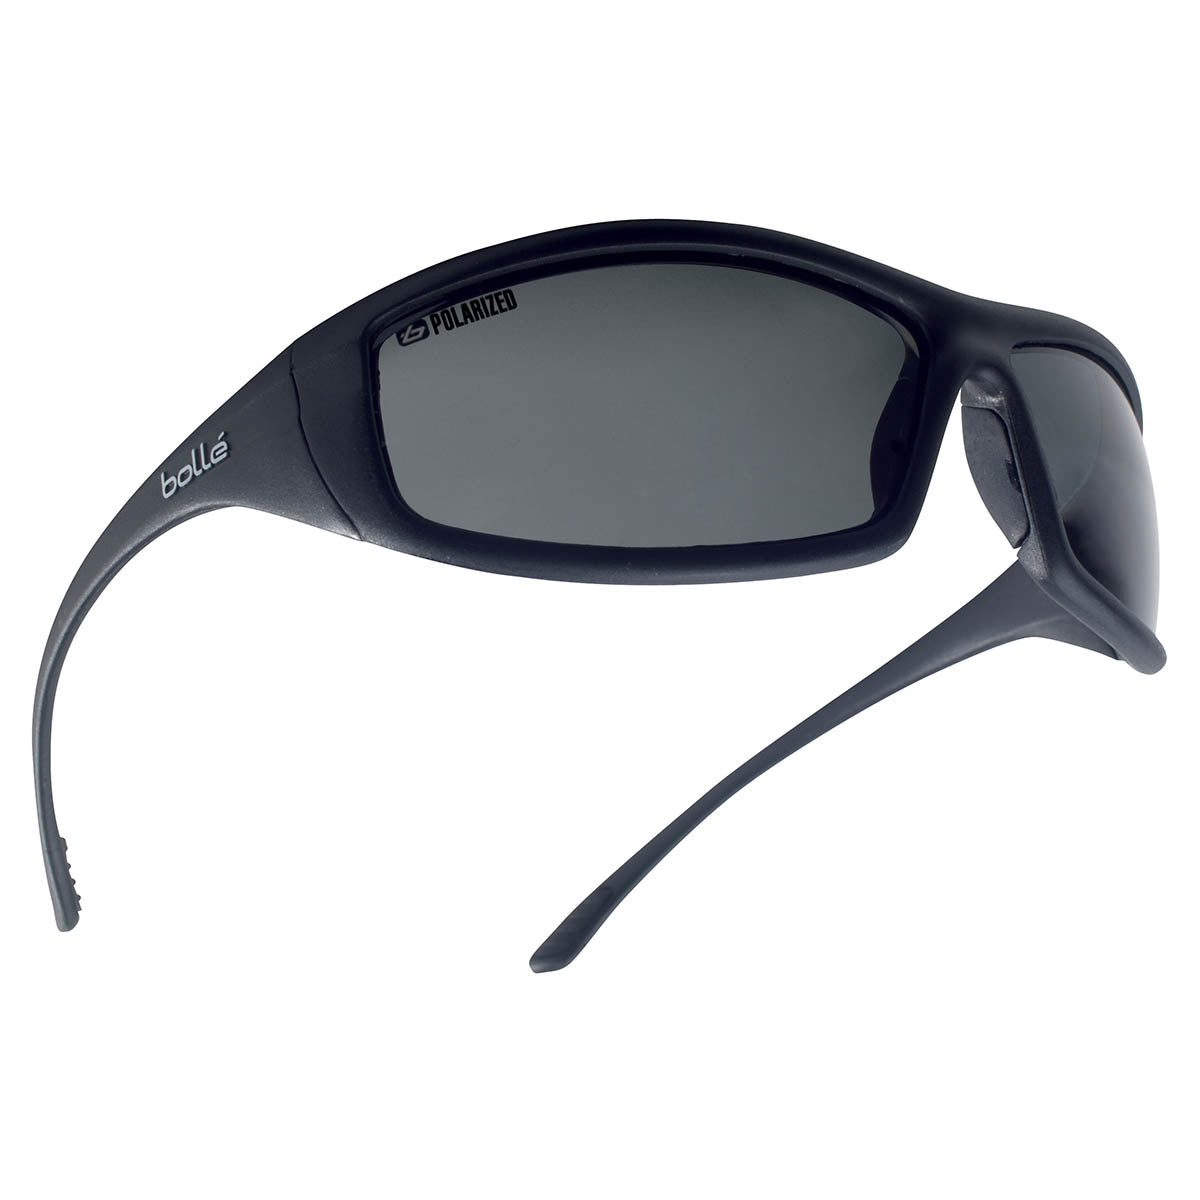 Bolle SOLIS Polarized Safety Glasses - SOLIPOL